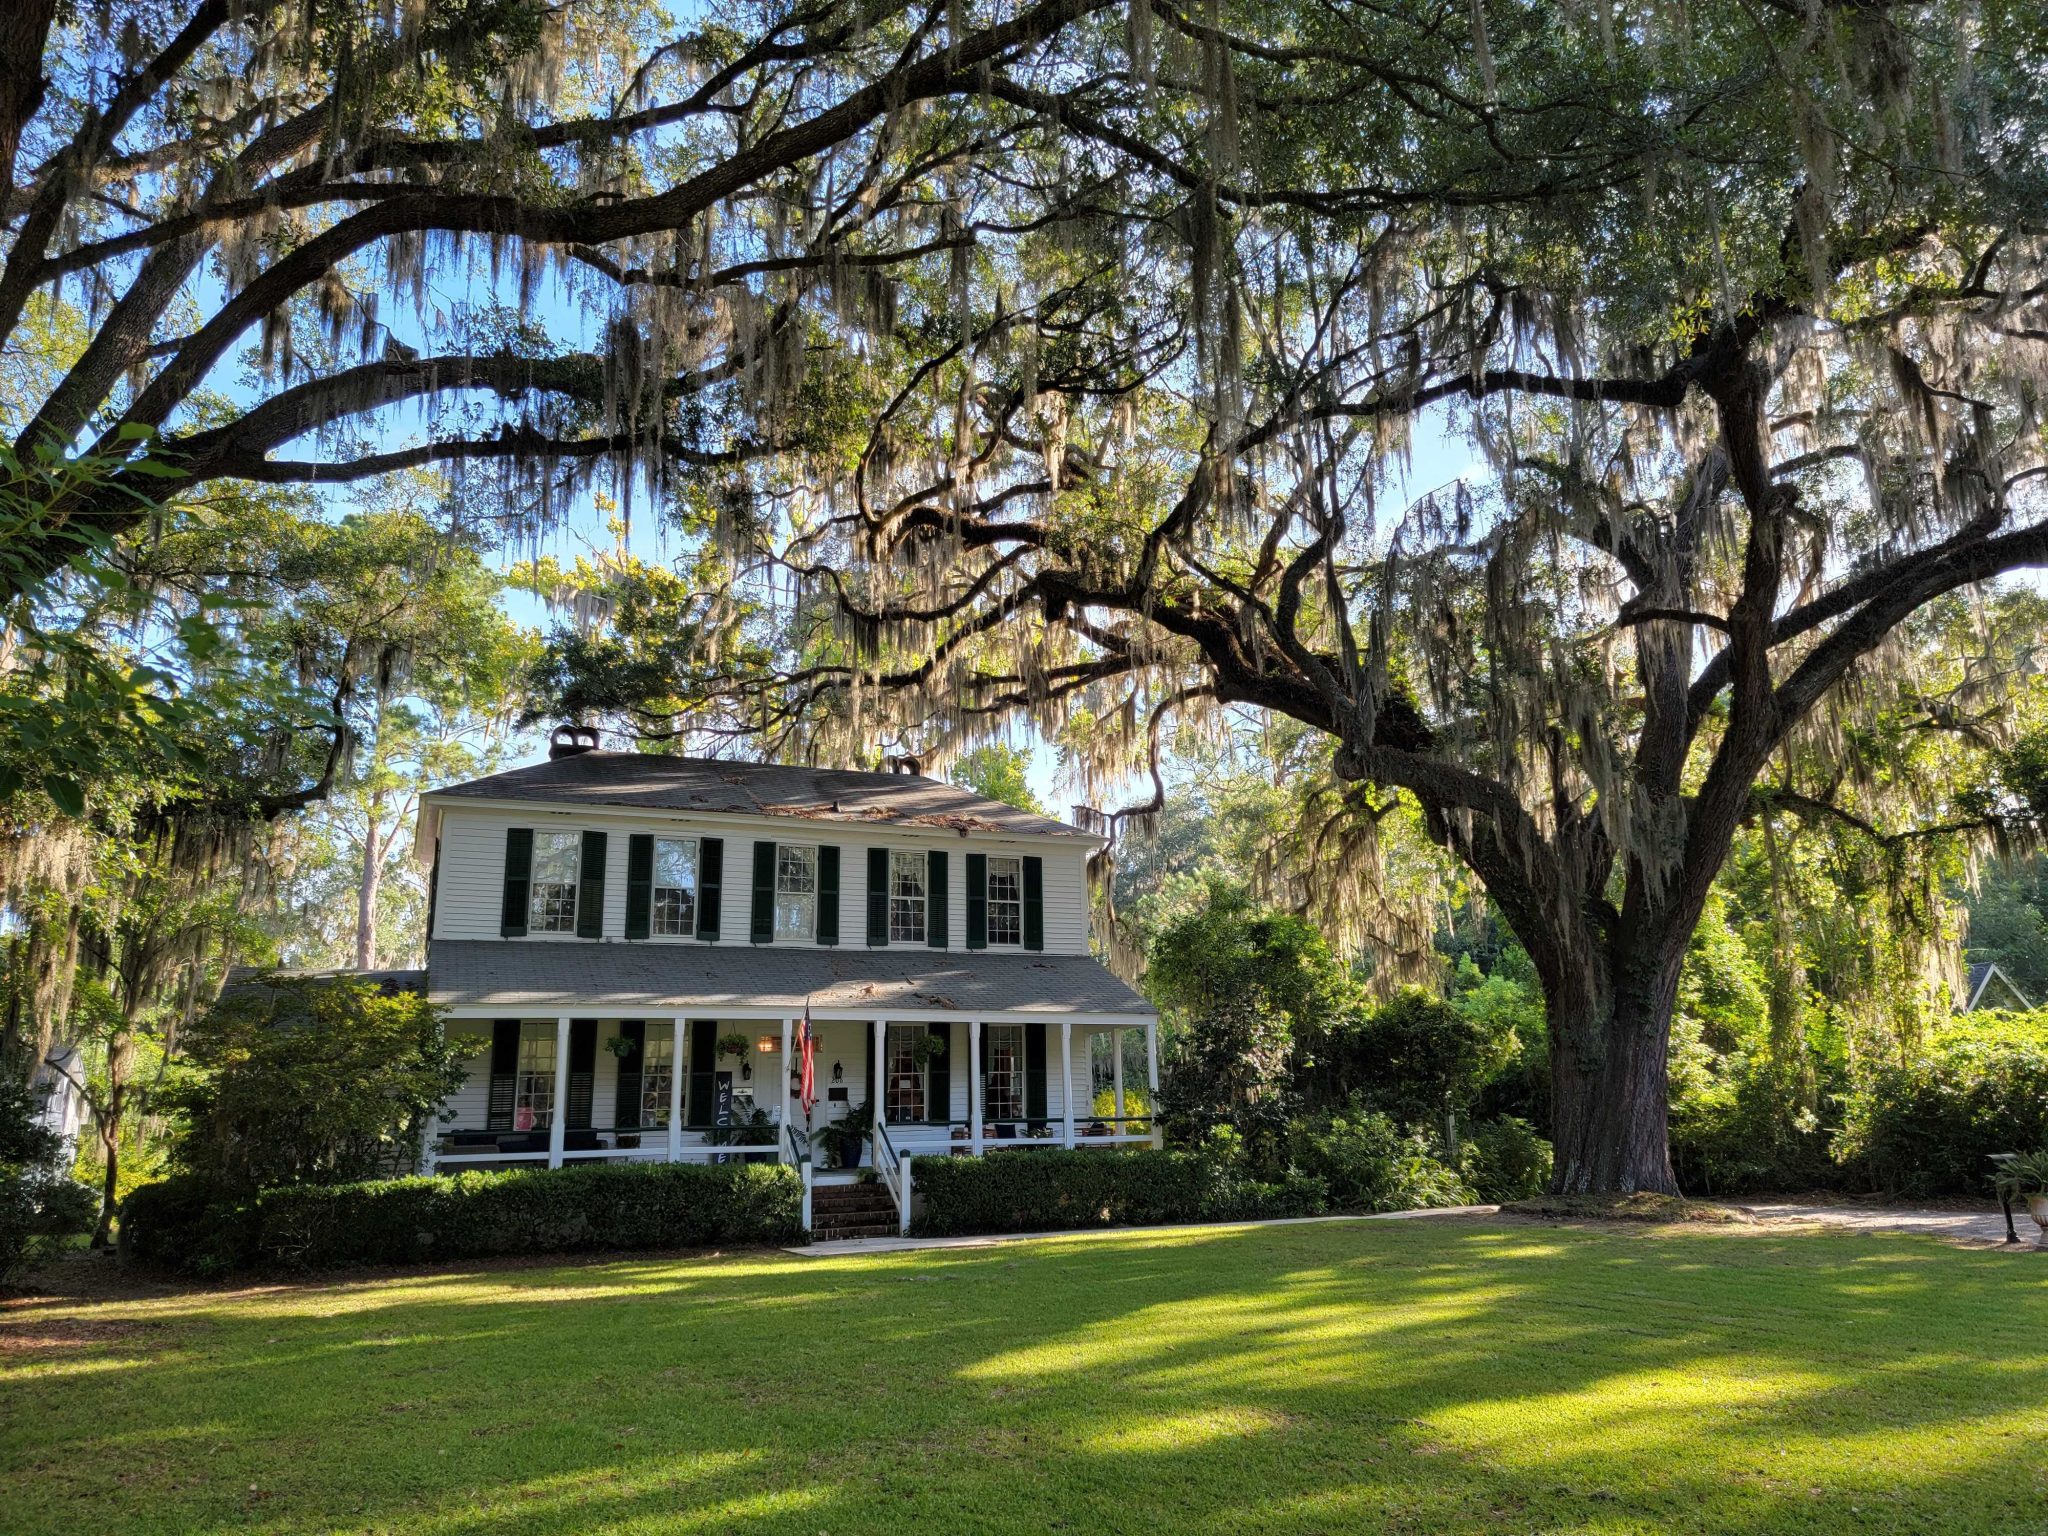 Bacon Fraser House 6 Places to Visit During Spooky Season in Liberty County